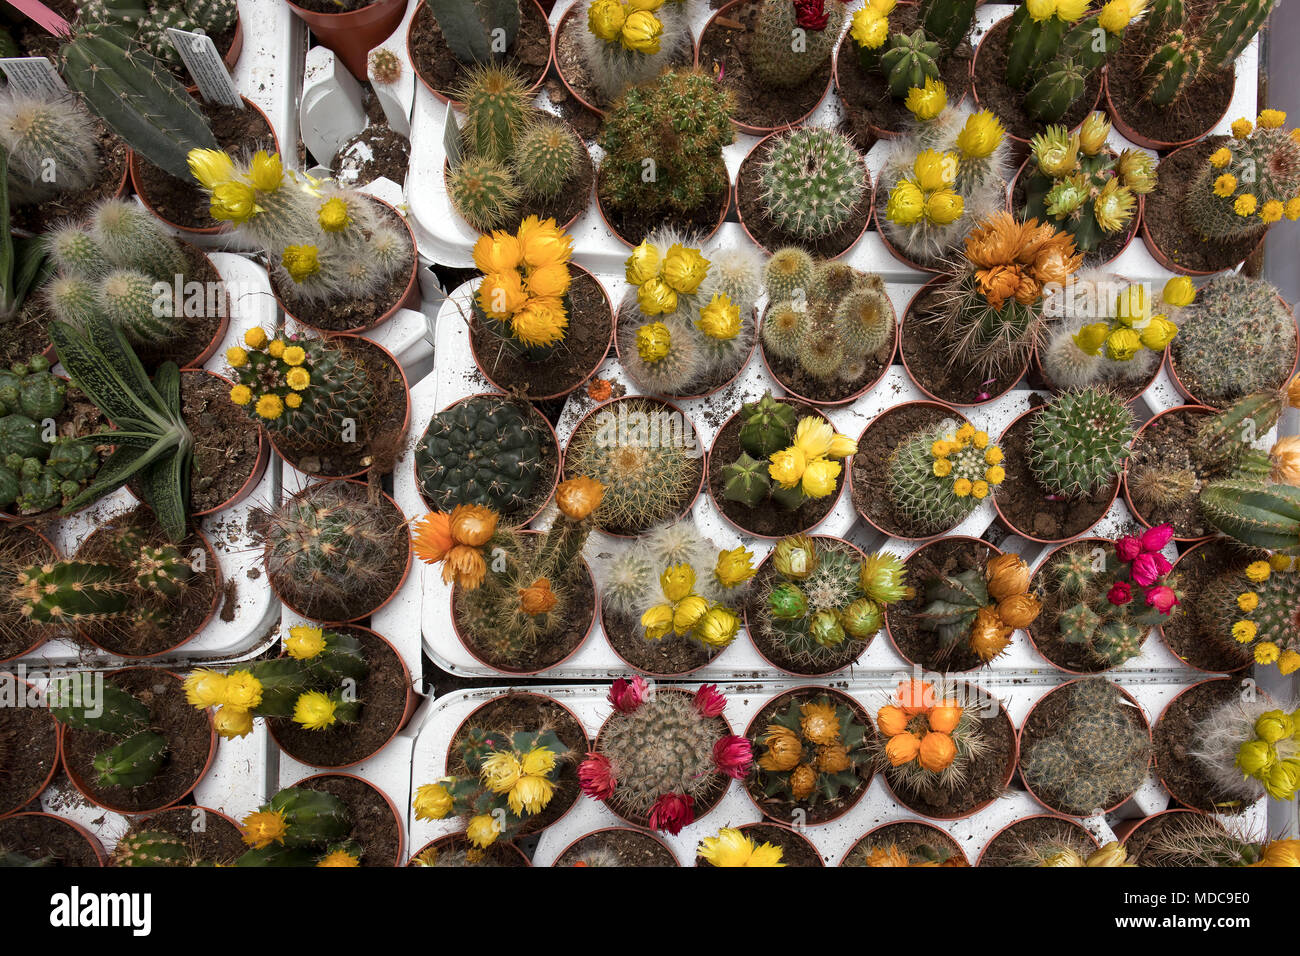 the Blooming cactus on sale in the shop Stock Photo